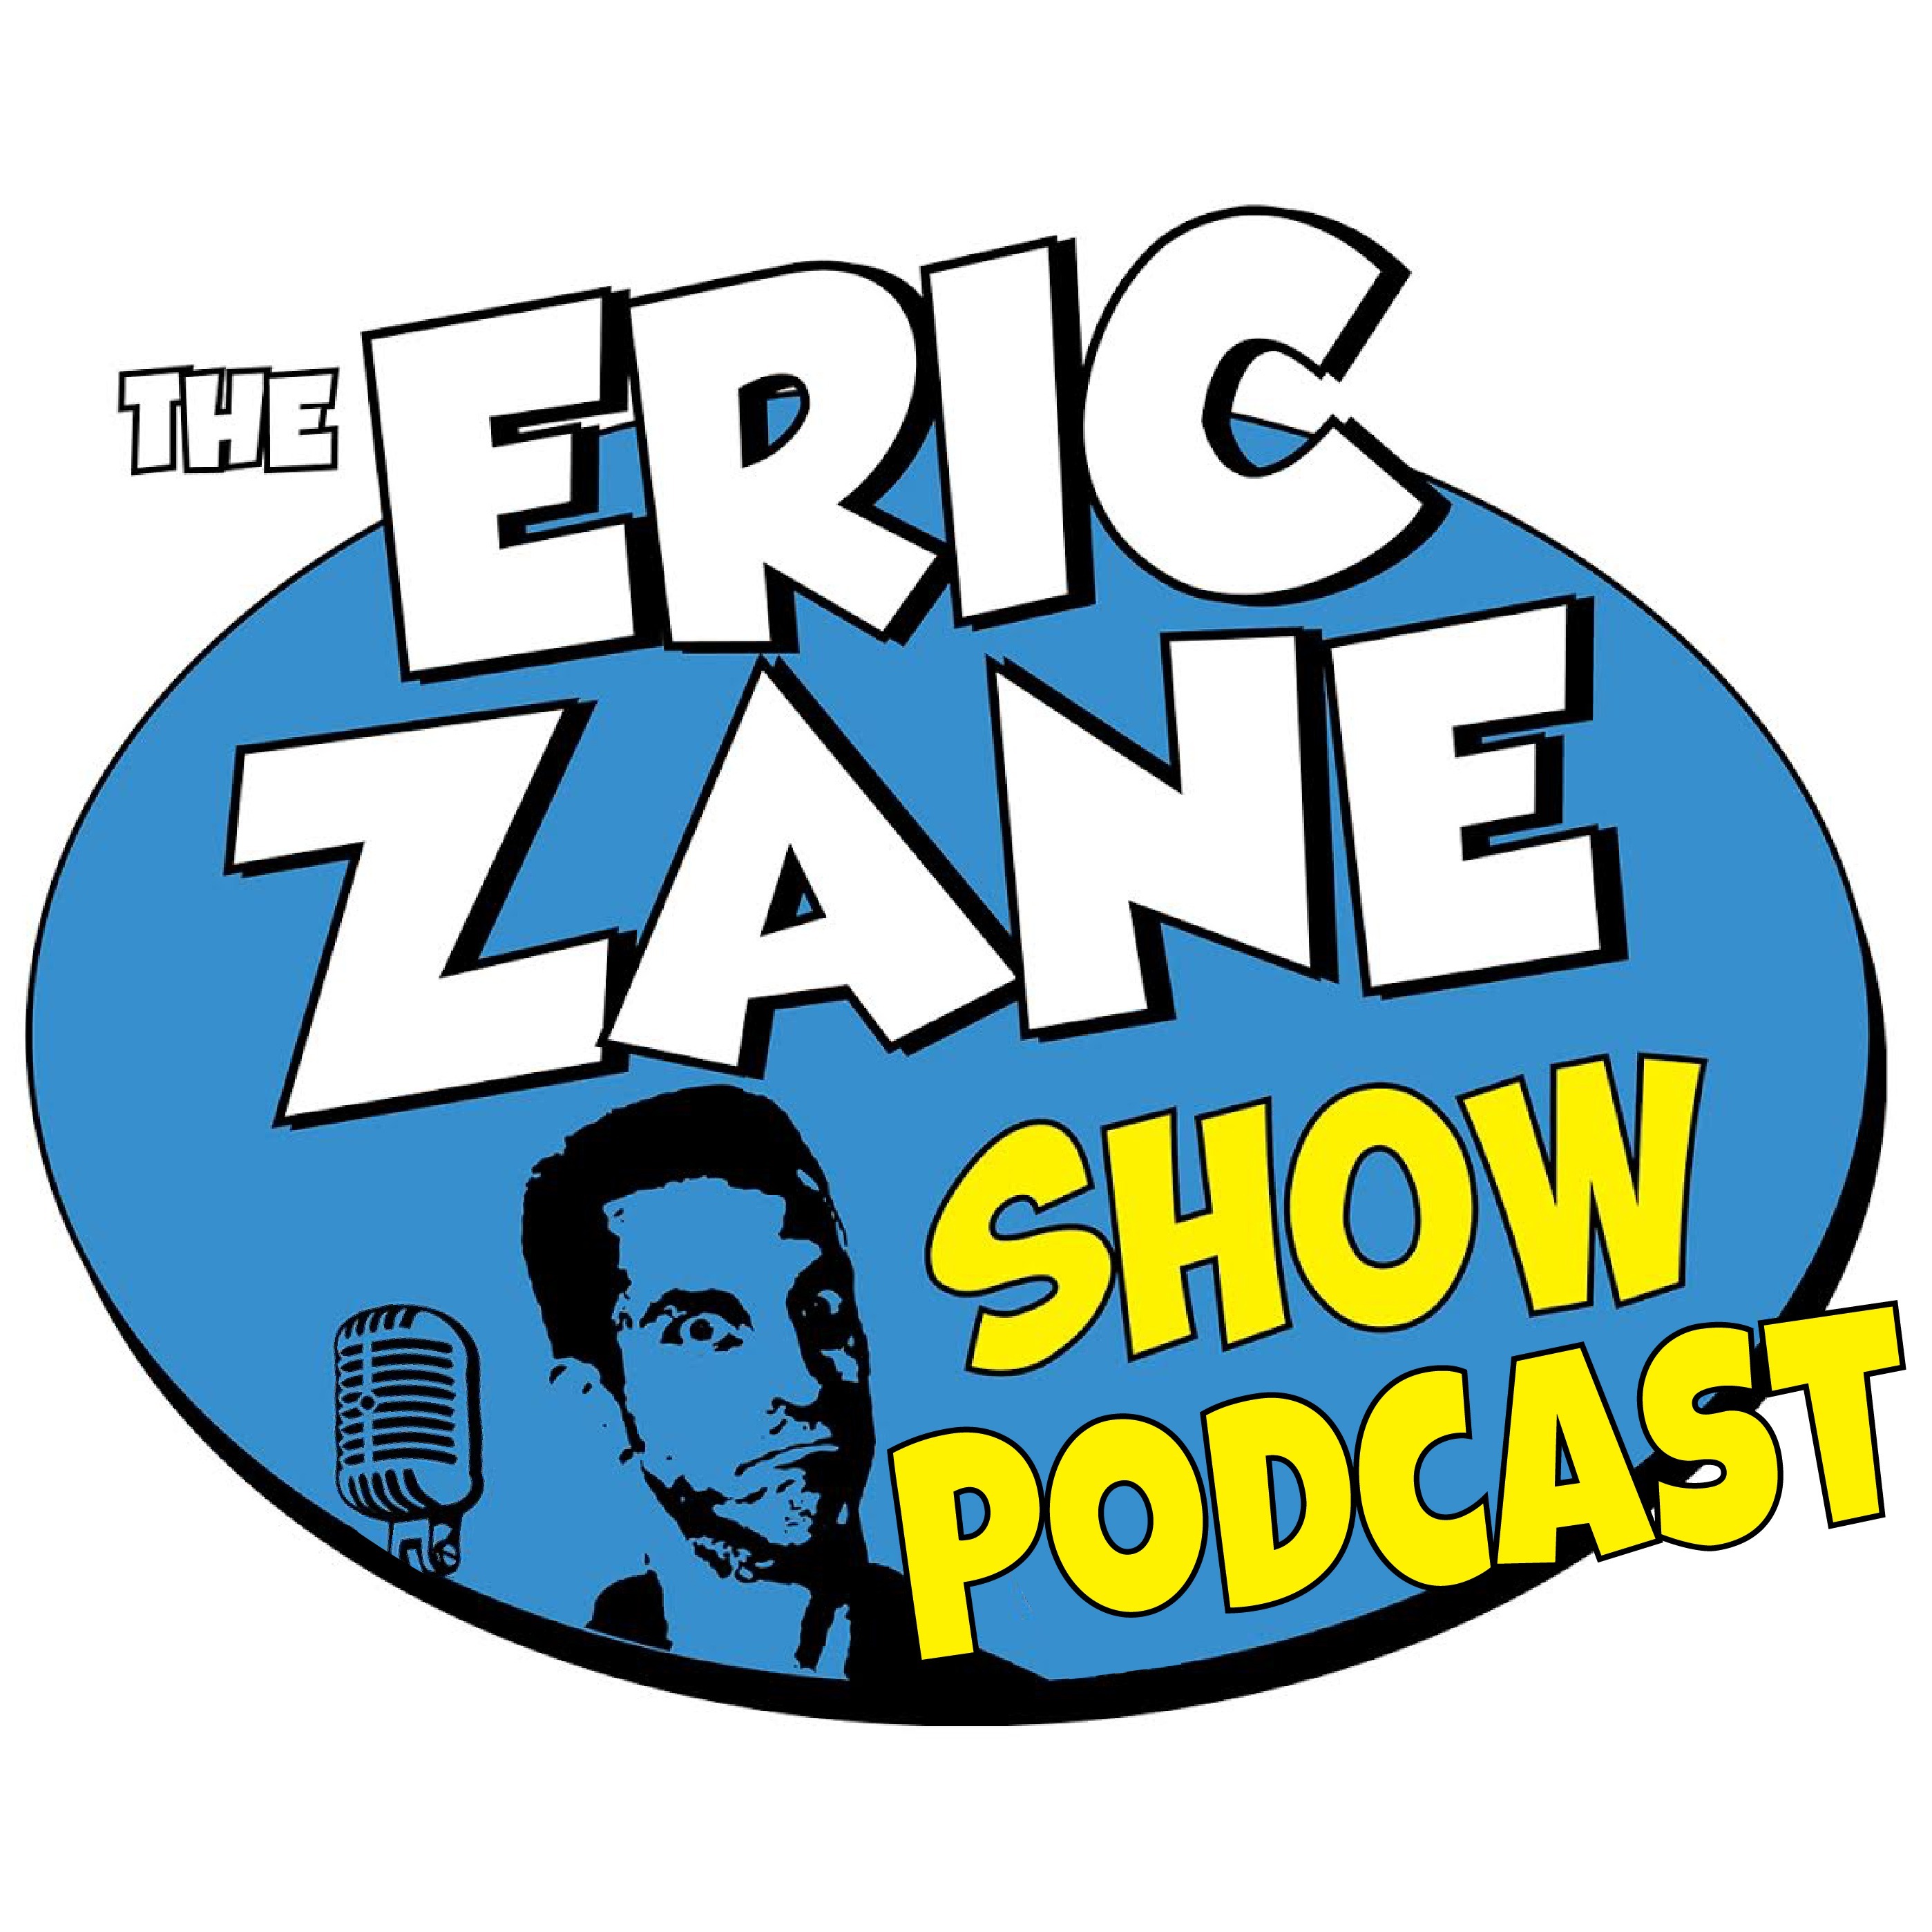 Eric Zane Show Podcast 745 The NFK in tears and wild NFL weekend